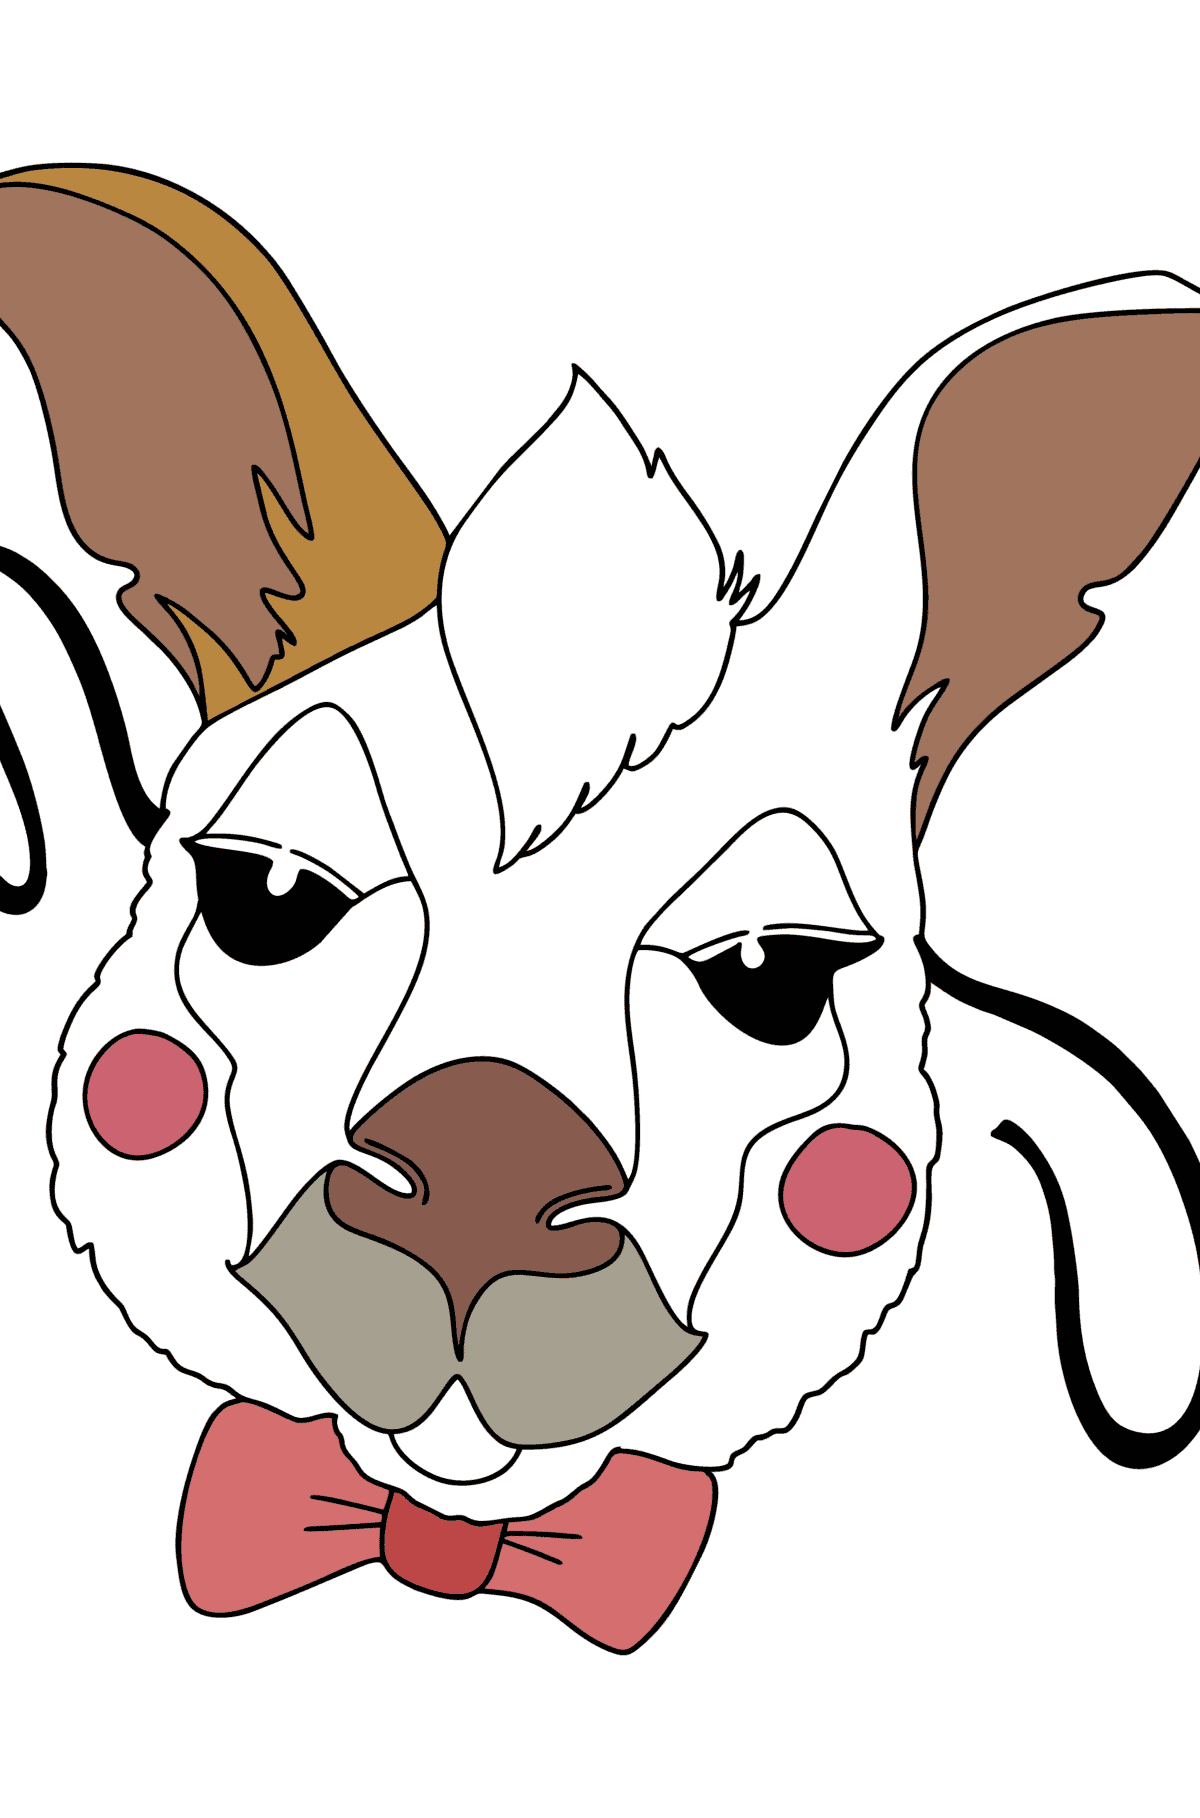 Kangaroo Mask coloring page - Coloring Pages for Kids